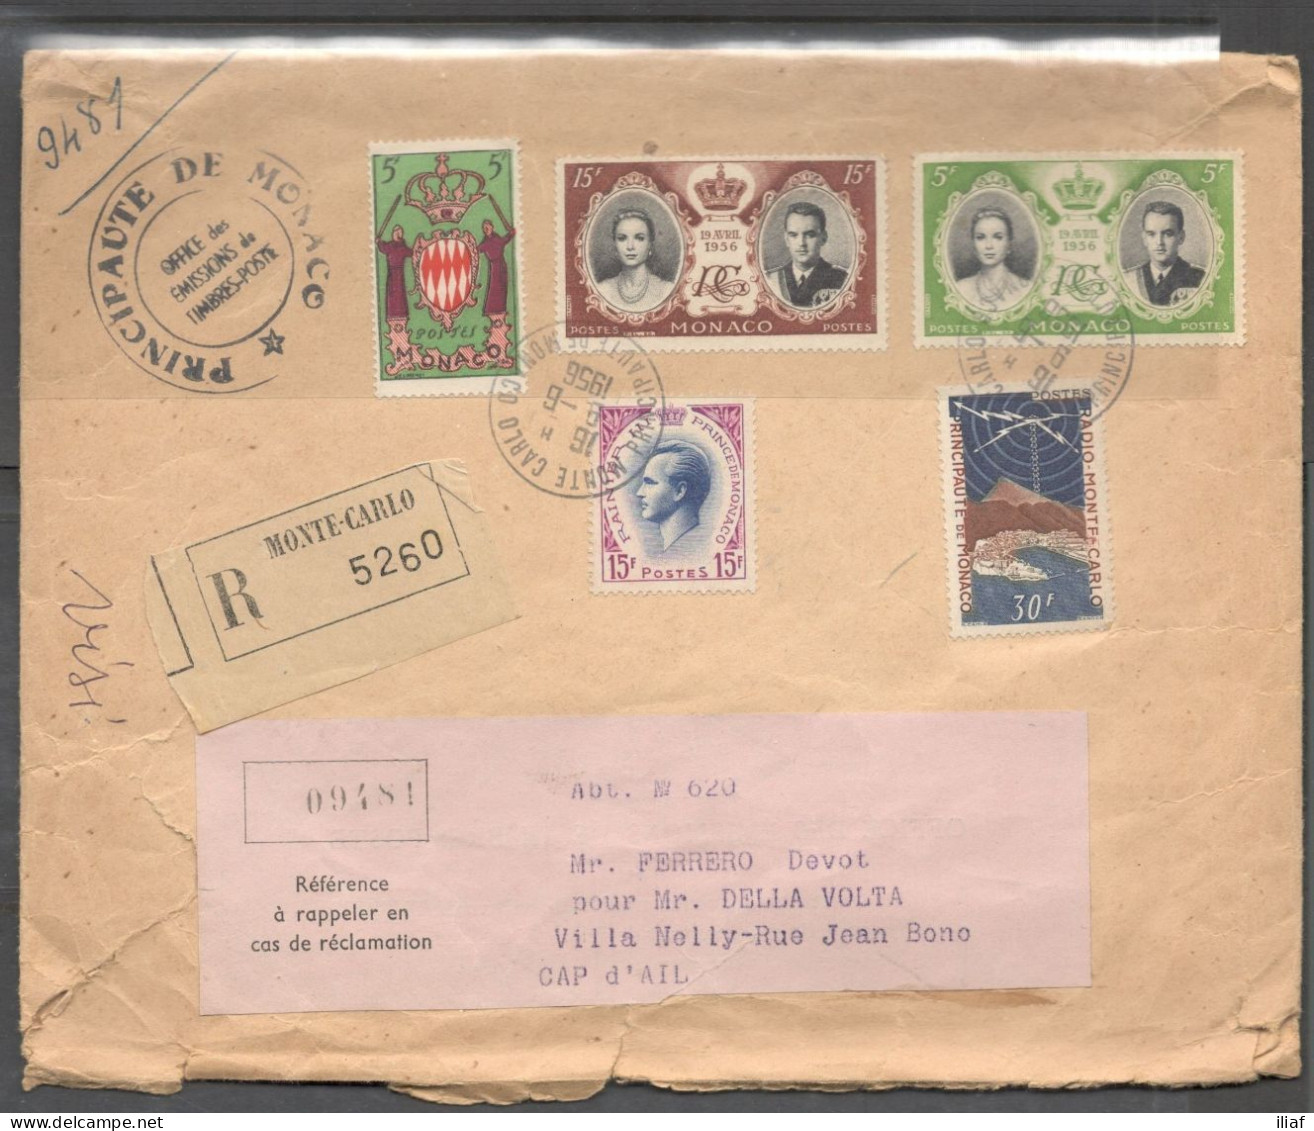 Monaco. Stamps Sc. 280, 318, 337, 369-370 On Registered Letter, Sent From Monte-Carlo, Monaco On 9.06.1956 To Cap-d'Ail - Lettres & Documents